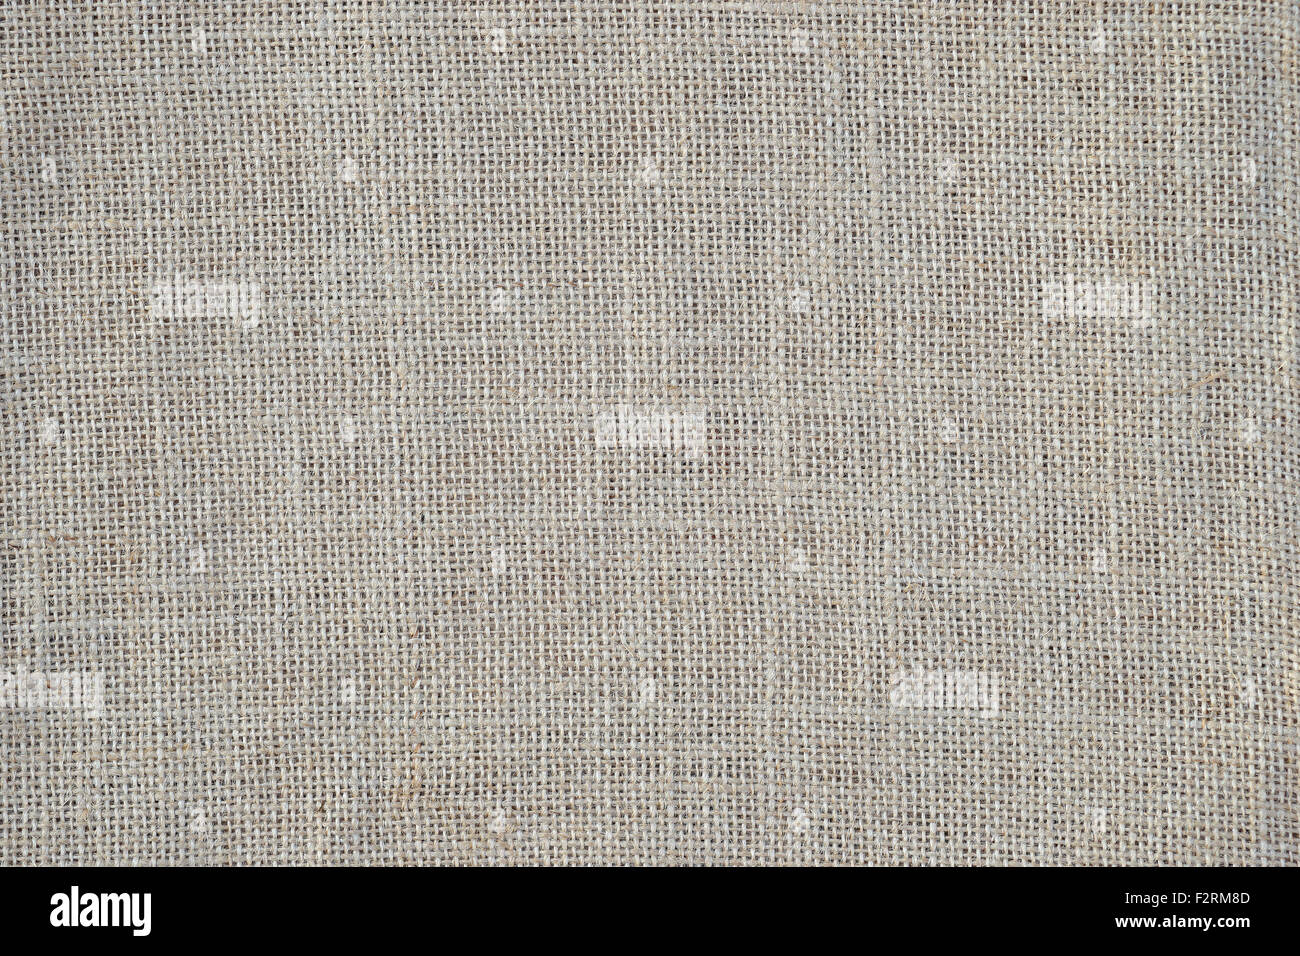 burlap or linen fabric as background or texture Stock Photo